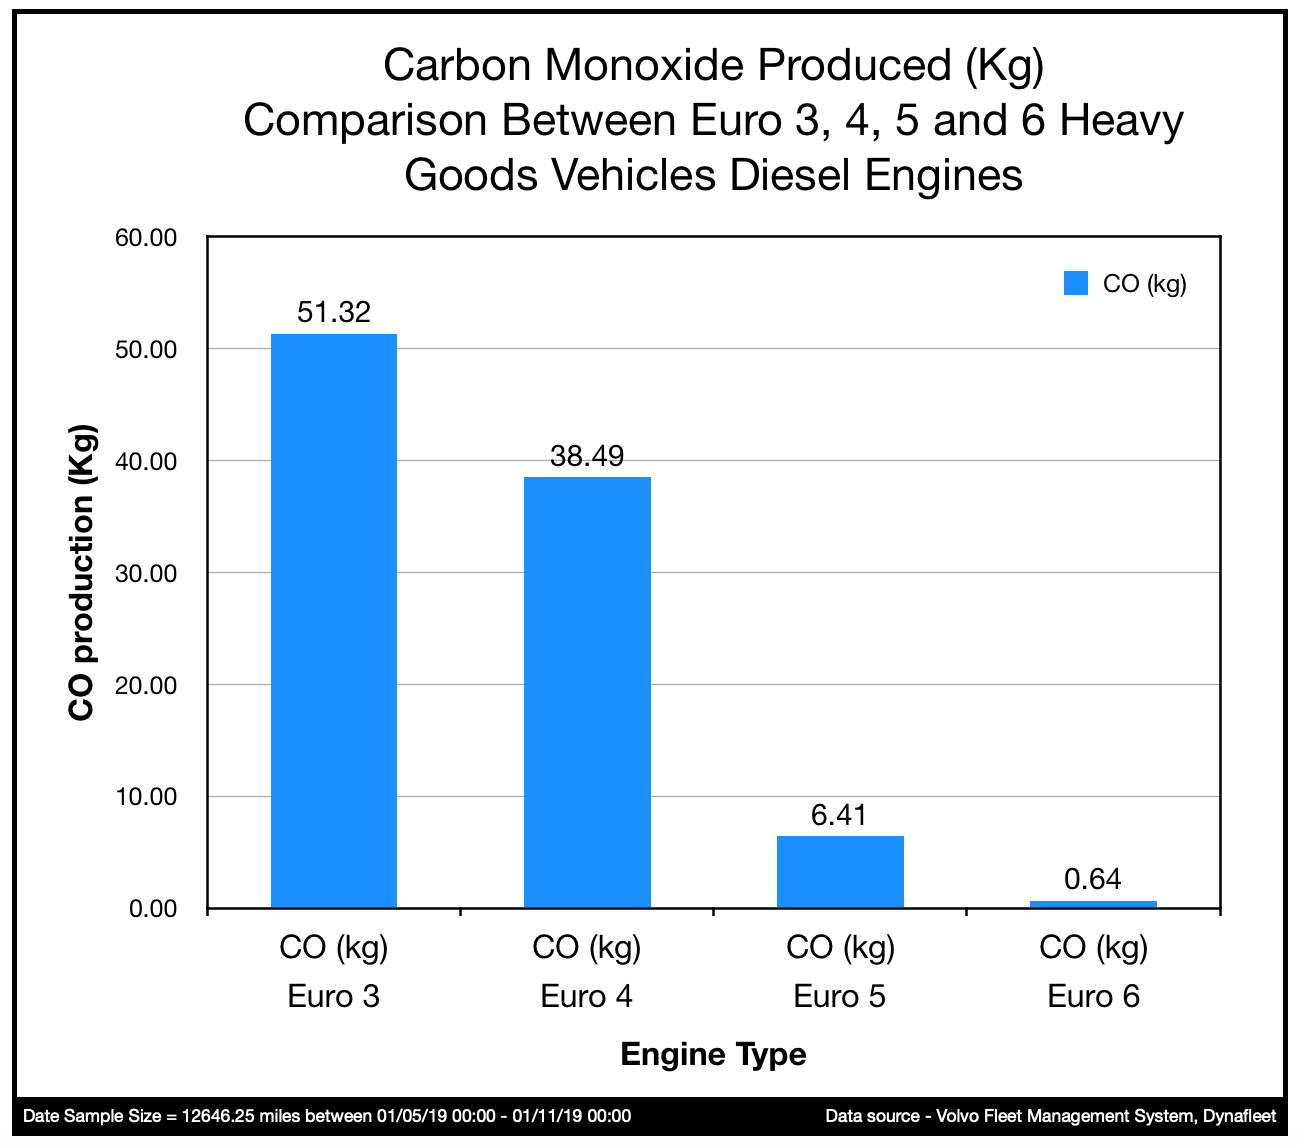 Comparison of Carbon Monoxide produced by Euro 3, Euro 4, Euro 5 and Euro 6 Vehicles